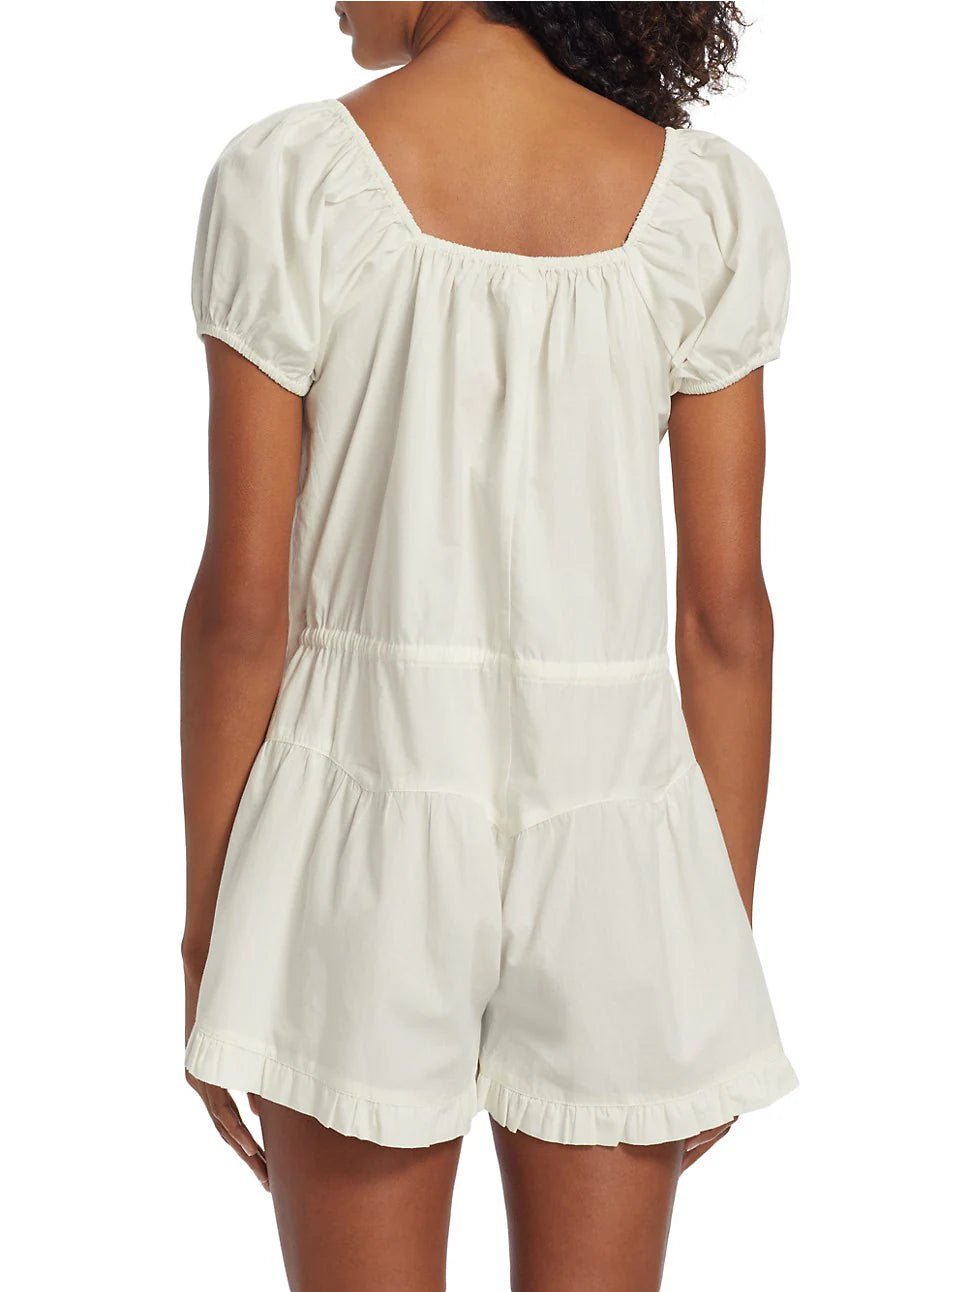 A Sight for Sore Eyes Romper